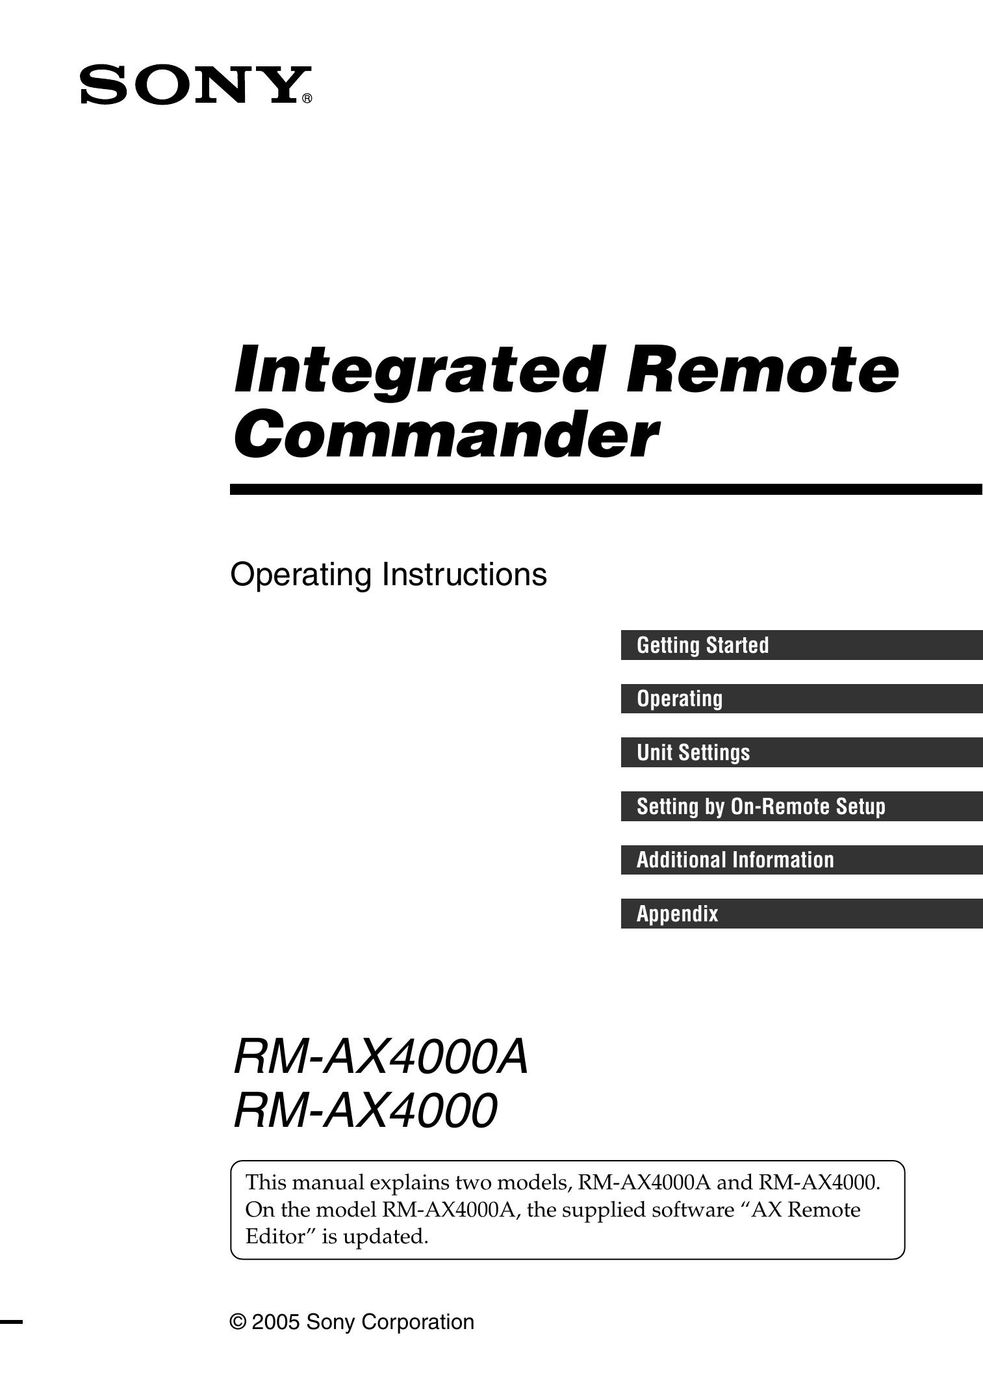 Sony RM-AX4000A Universal Remote User Manual